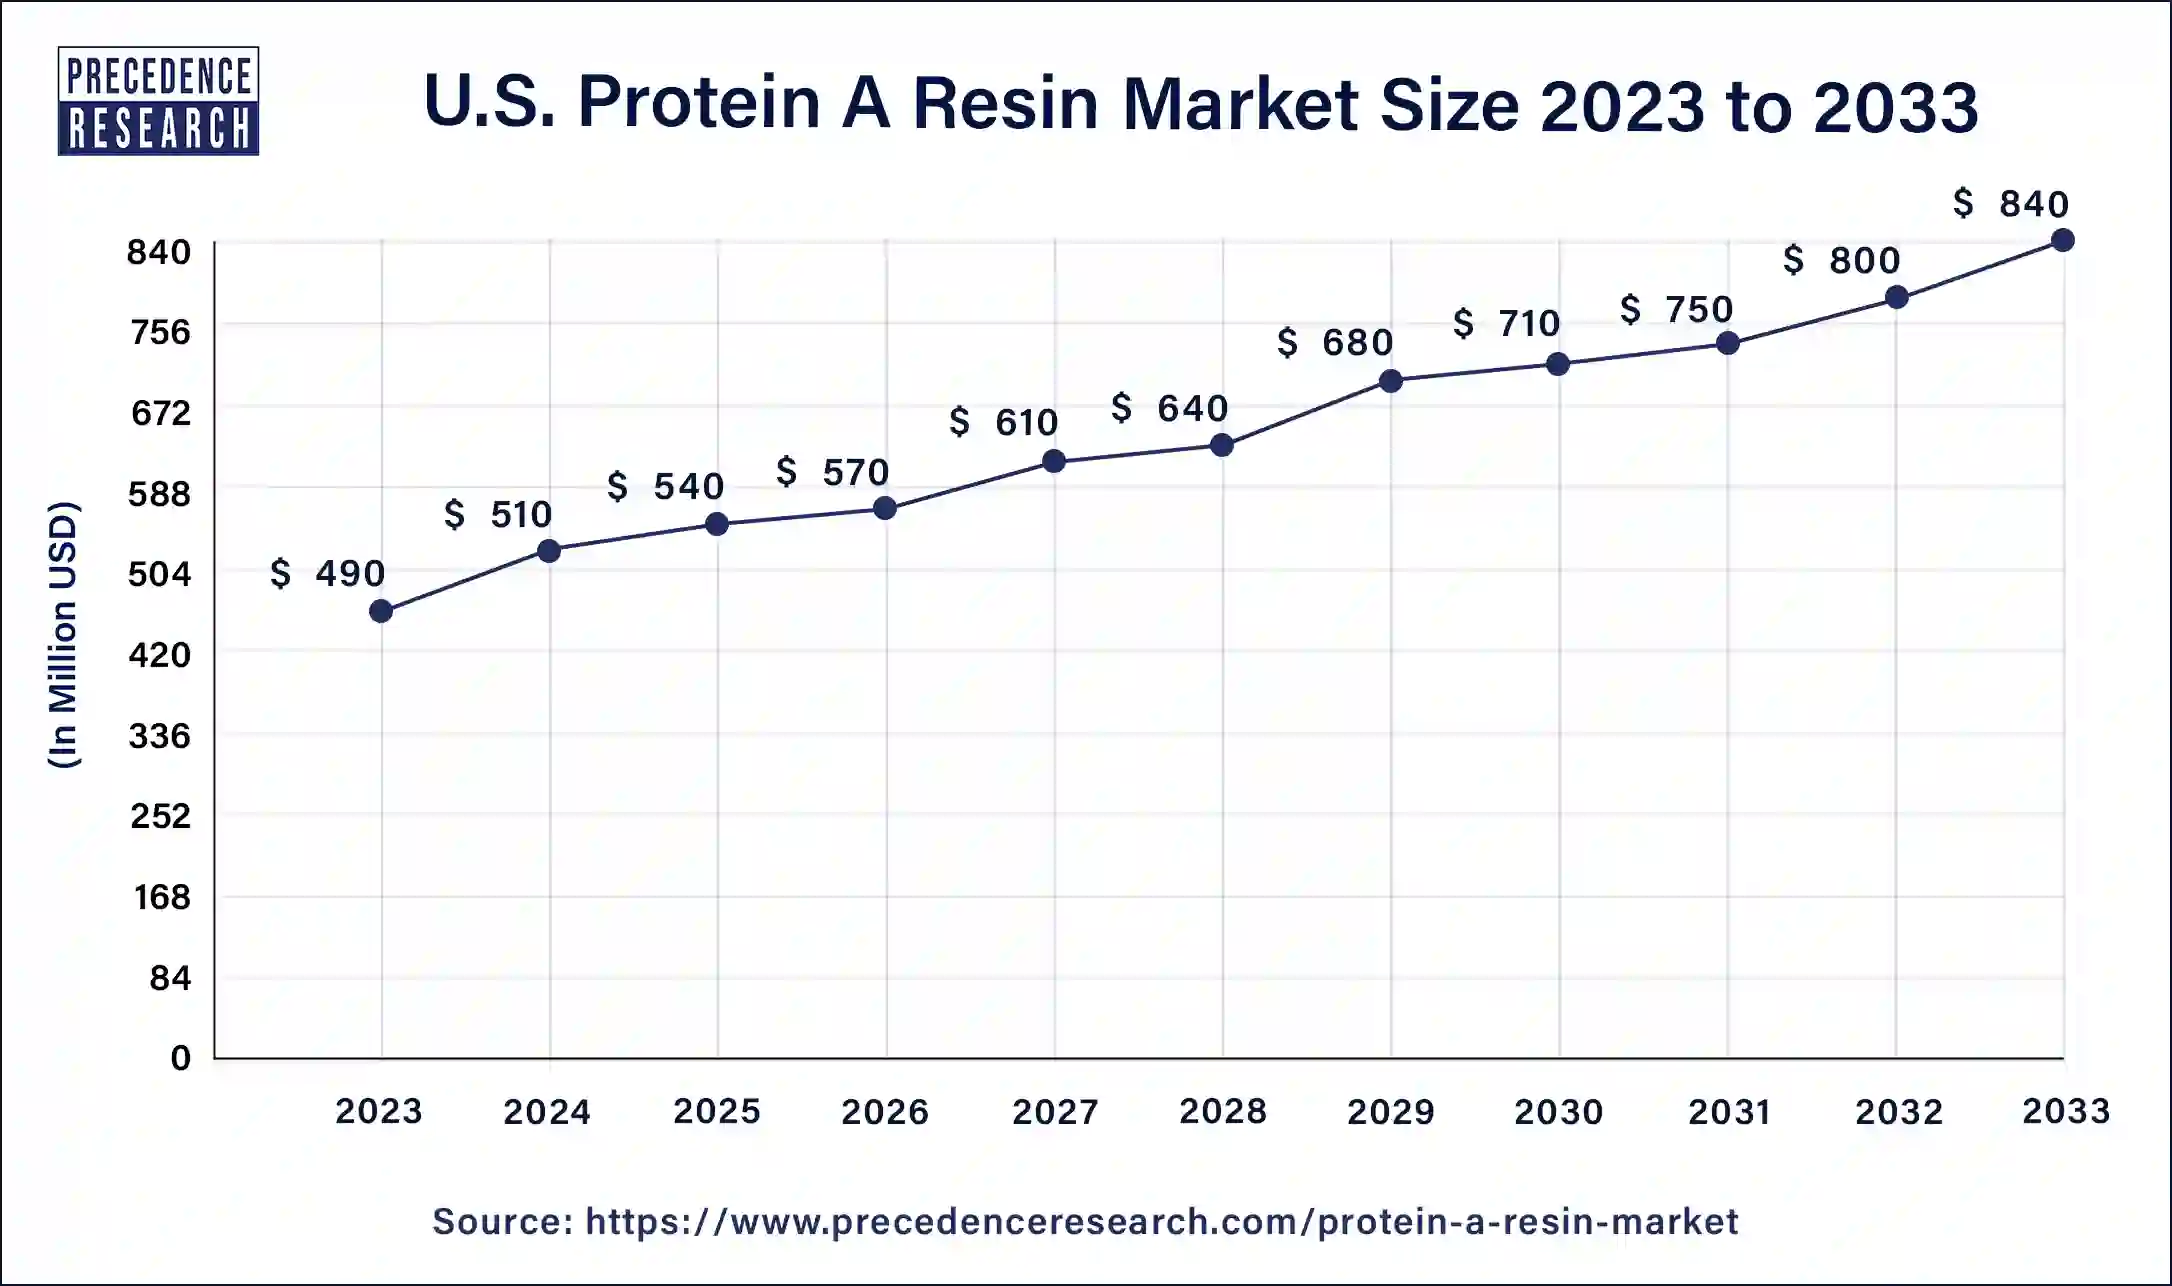 U.S. Protein a Resin Market Size 2024 to 2033